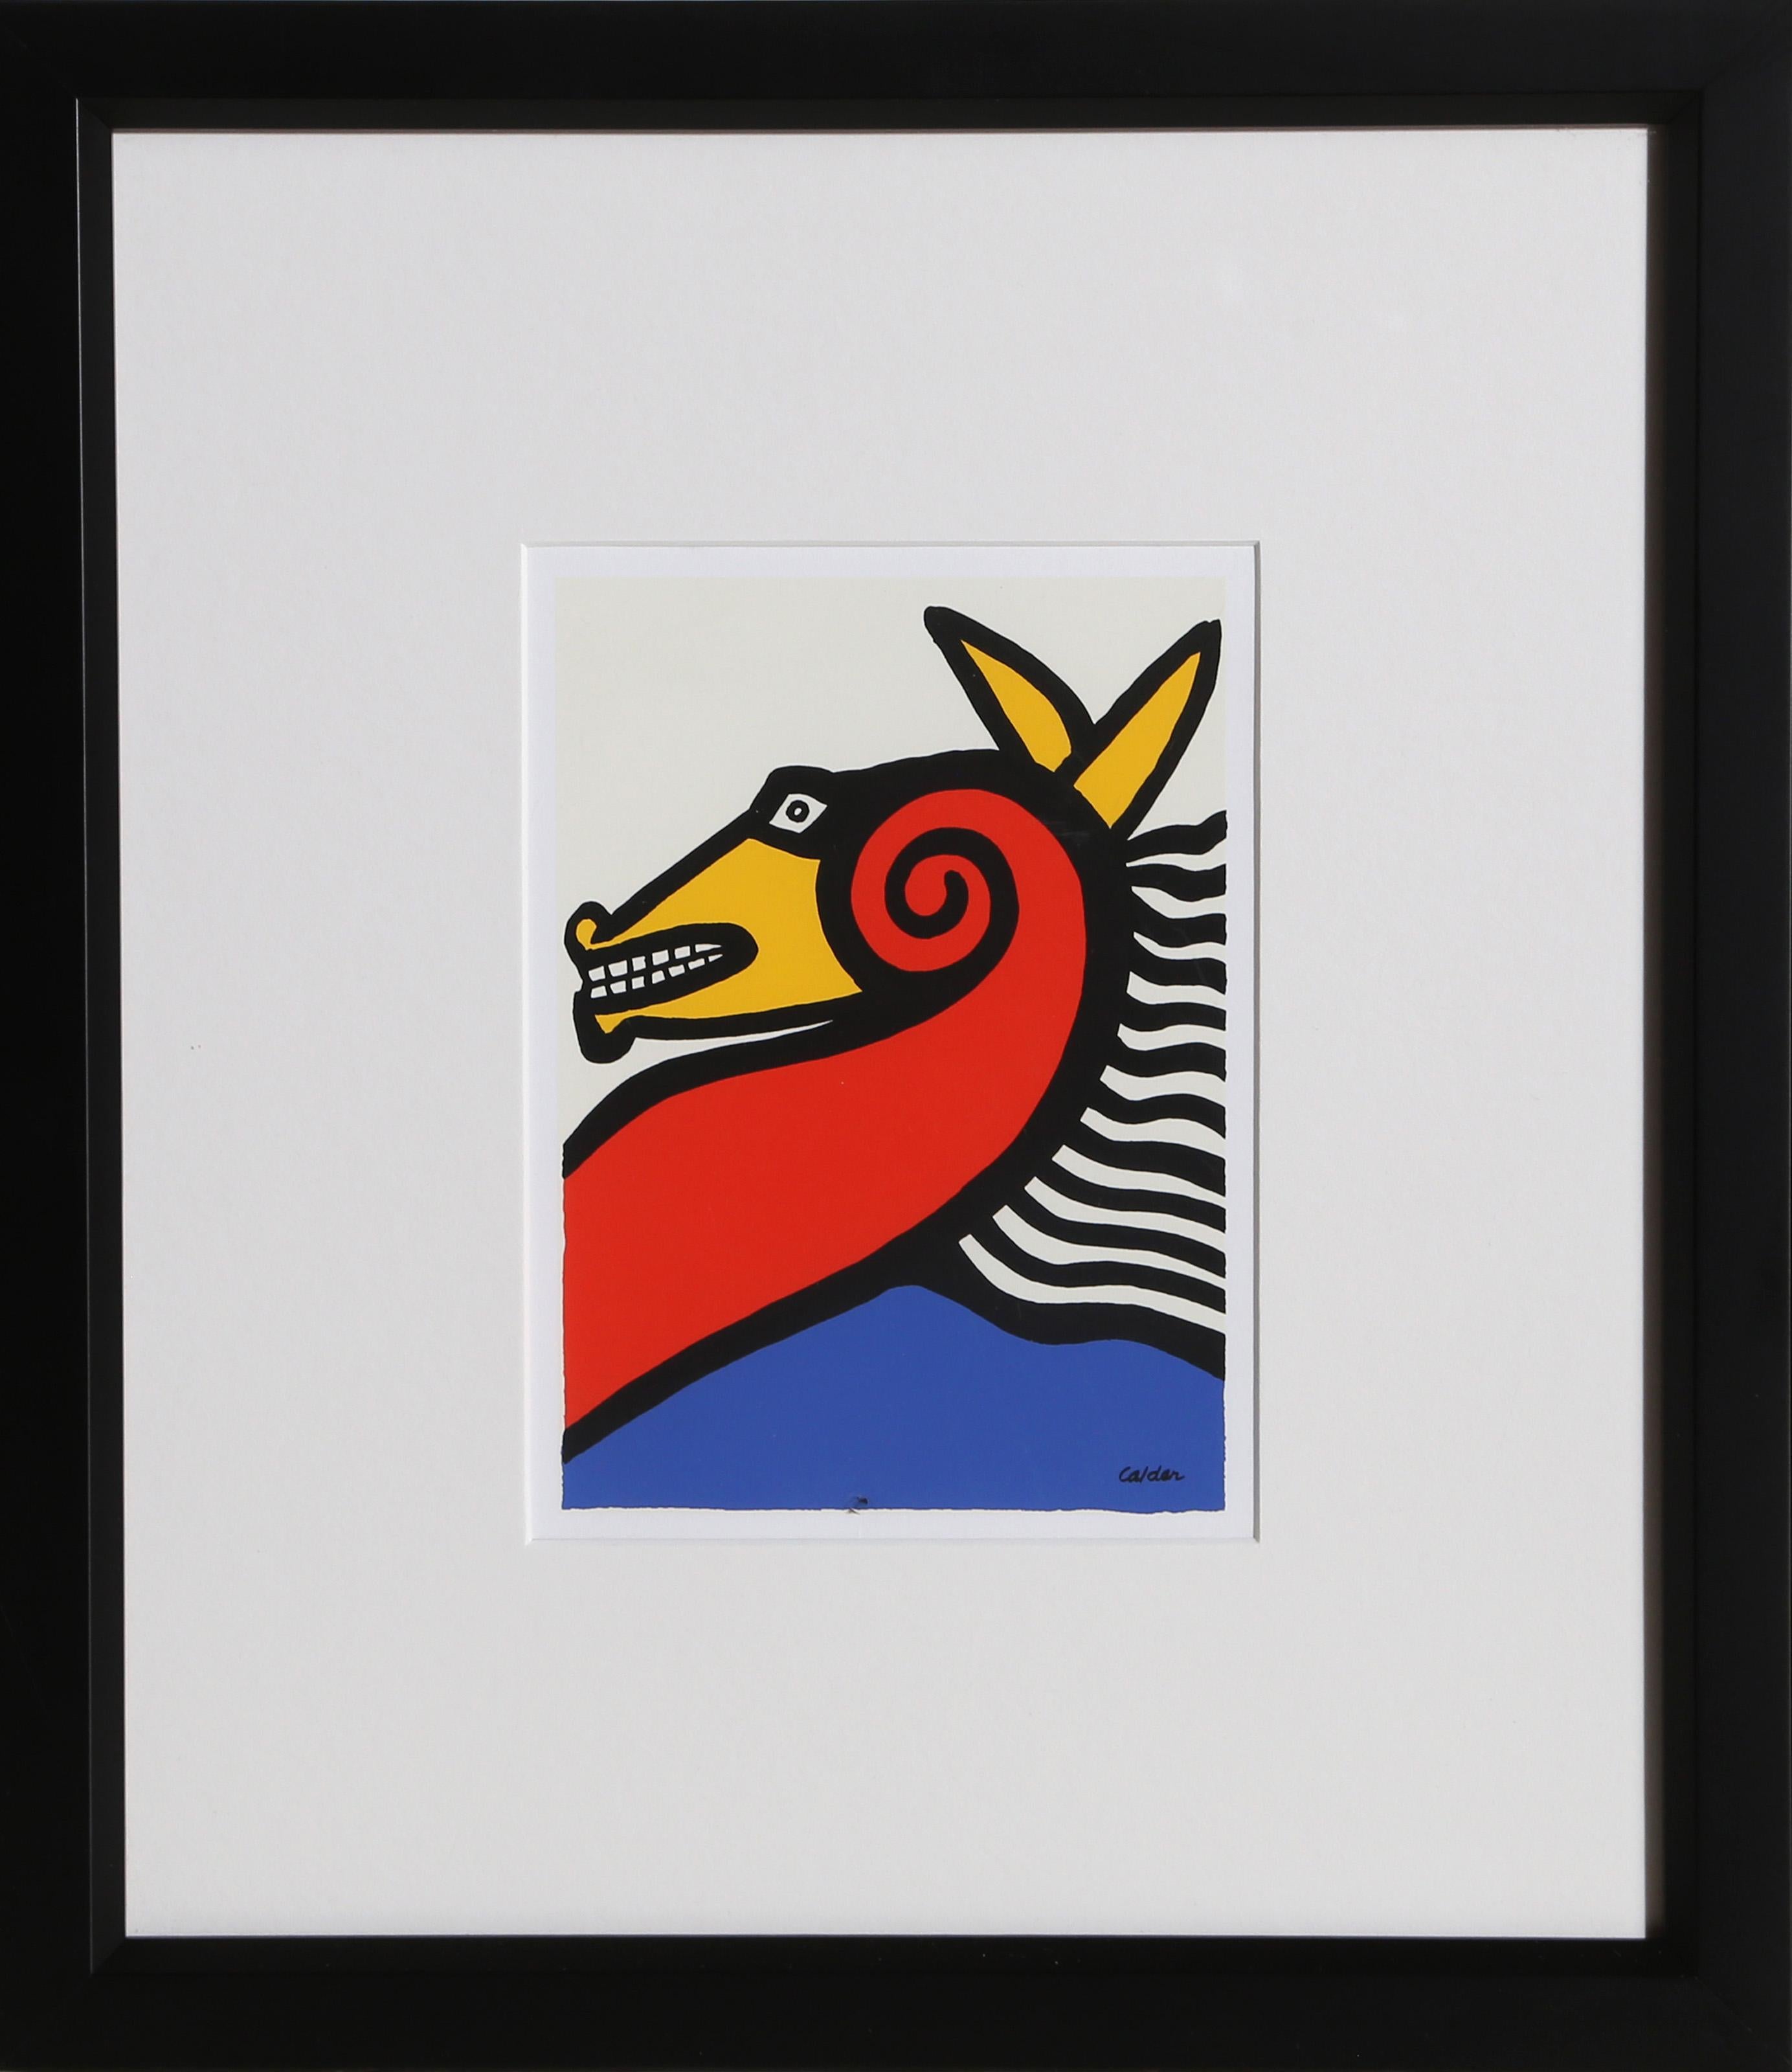 Alexander Calder, After, American (1898 - 1976) -  Seahorse. Year: circa 1975, Medium: Screenprint on Card Stock, Size: 7 x 4.5 in. (17.78 x 11.43 cm), Frame Size: 14.5 x 12.5 inches 